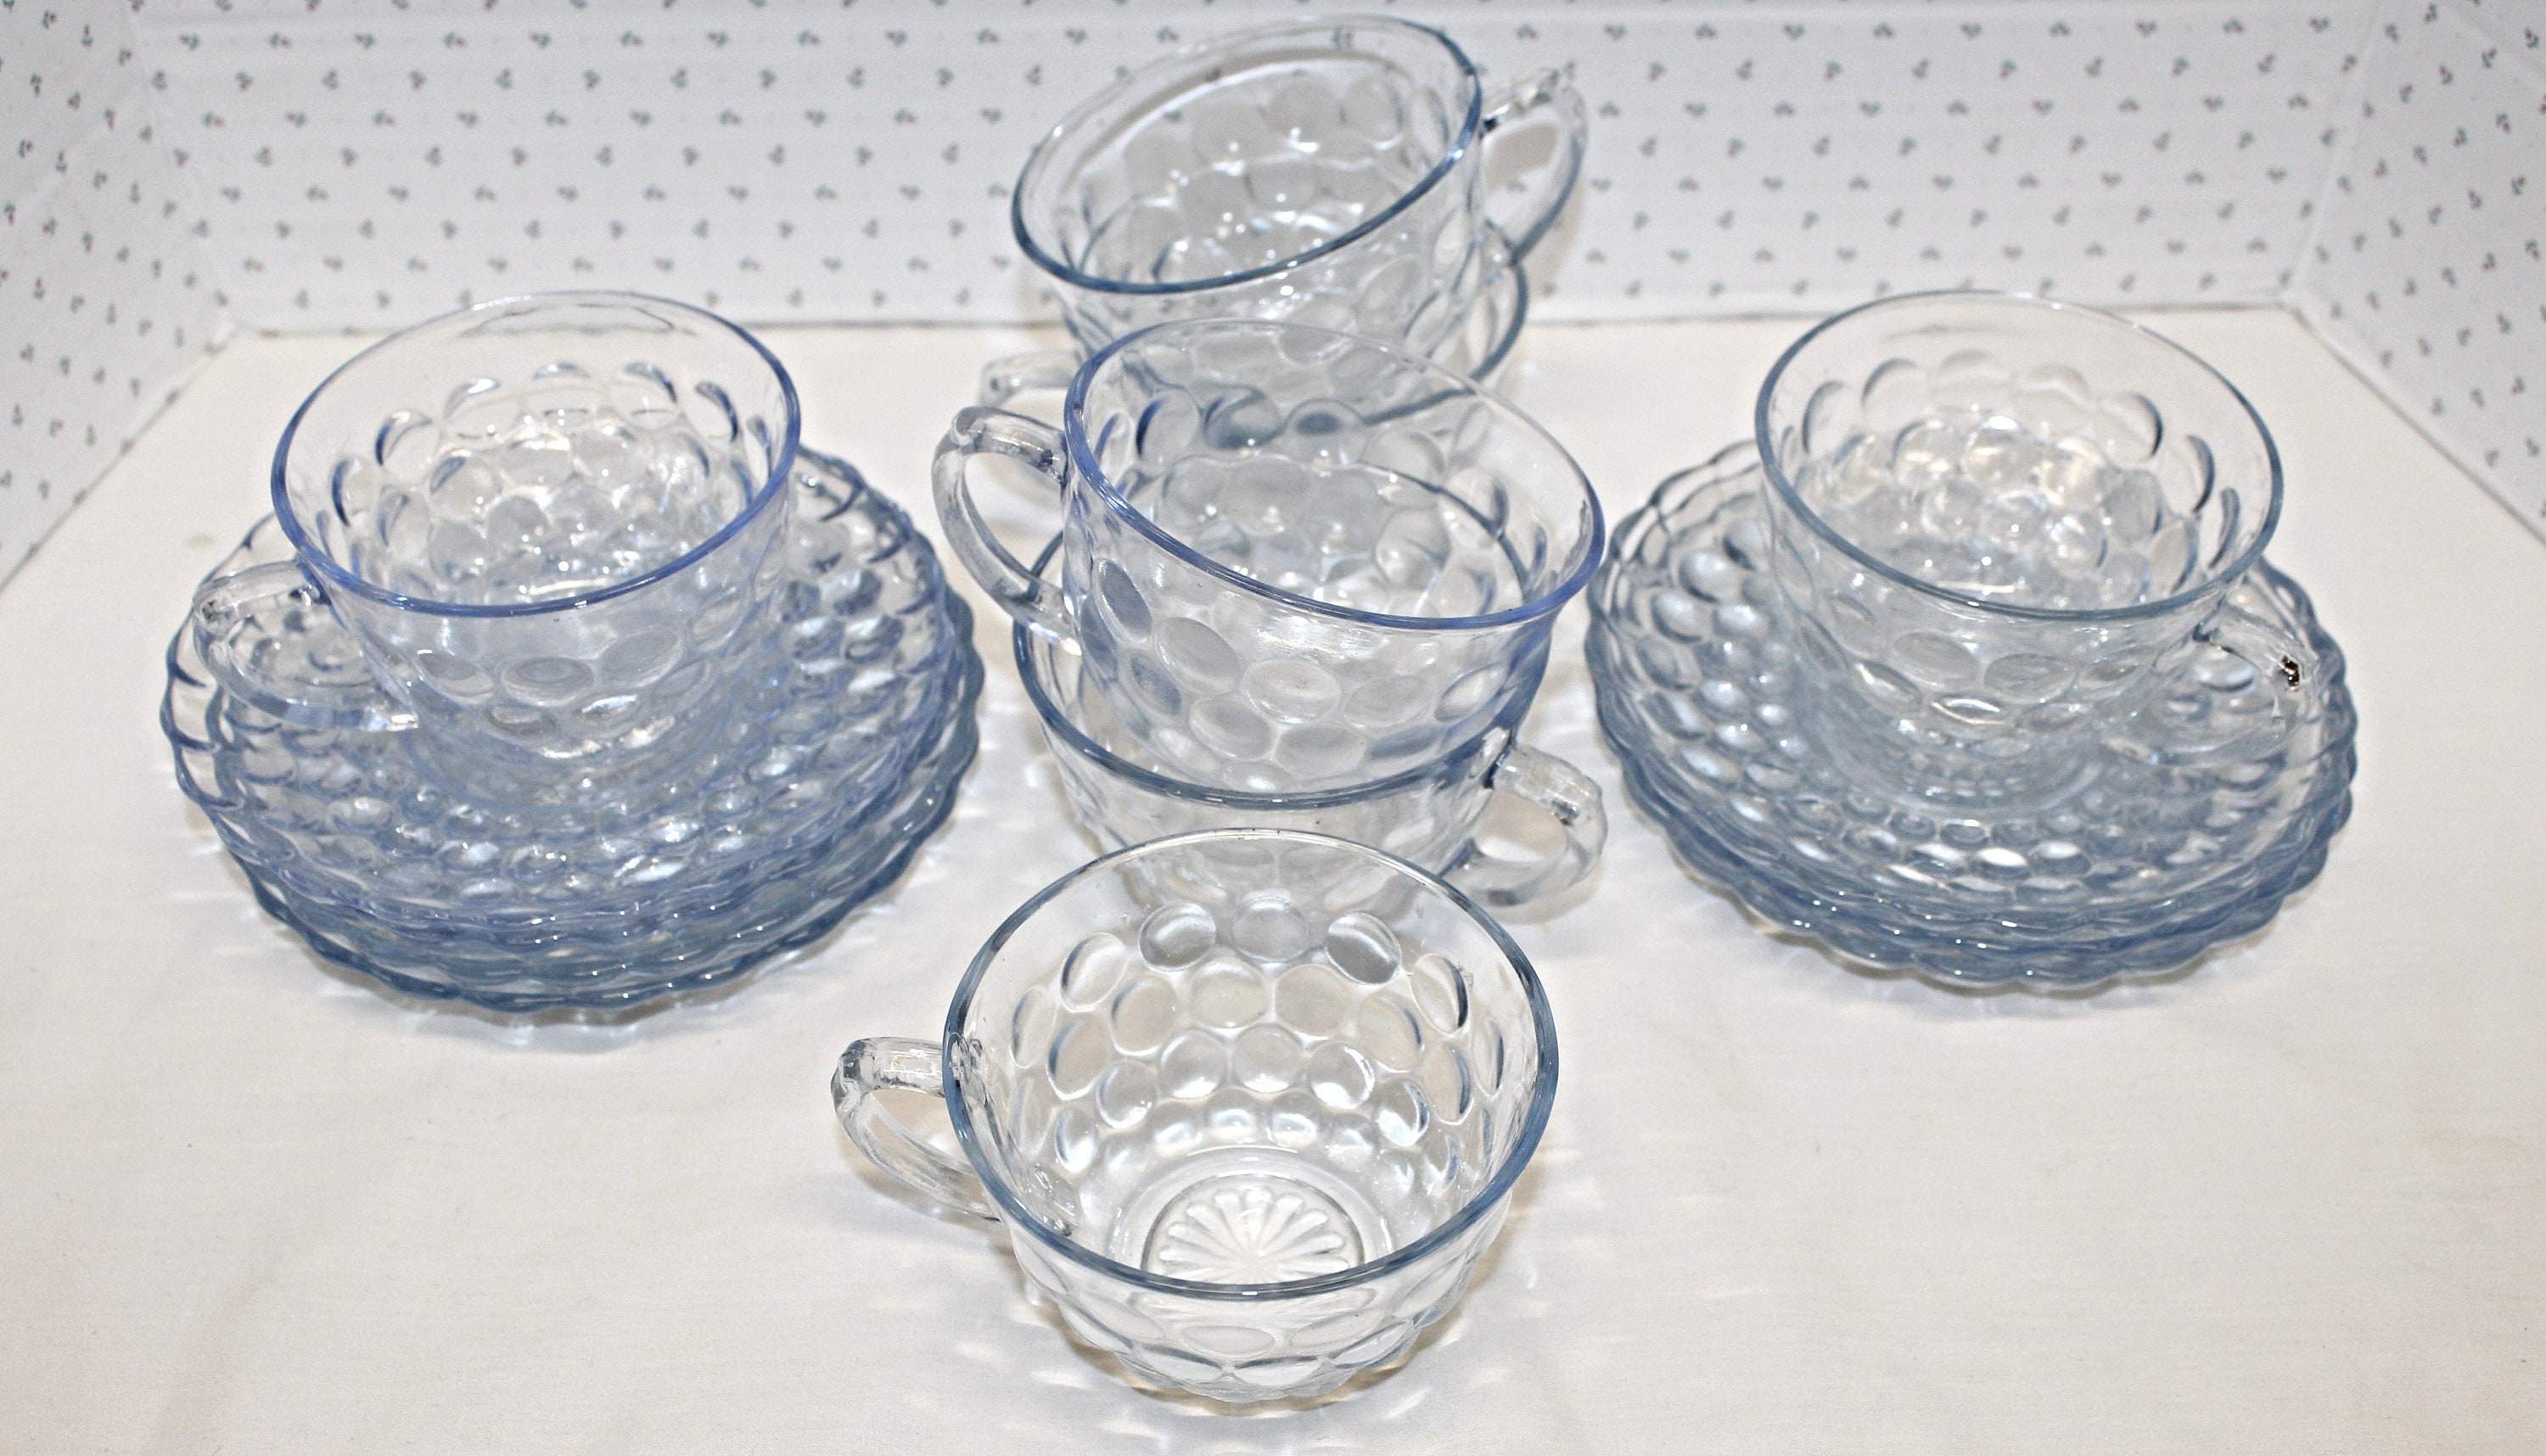 Vintage Anchor Hocking Blue Bubble Glass Cups & Saucers Set of 8 Sets,  Excellent Condition, Cups Hold 6 Oz. Coffee or Tea Cups Very Nice 